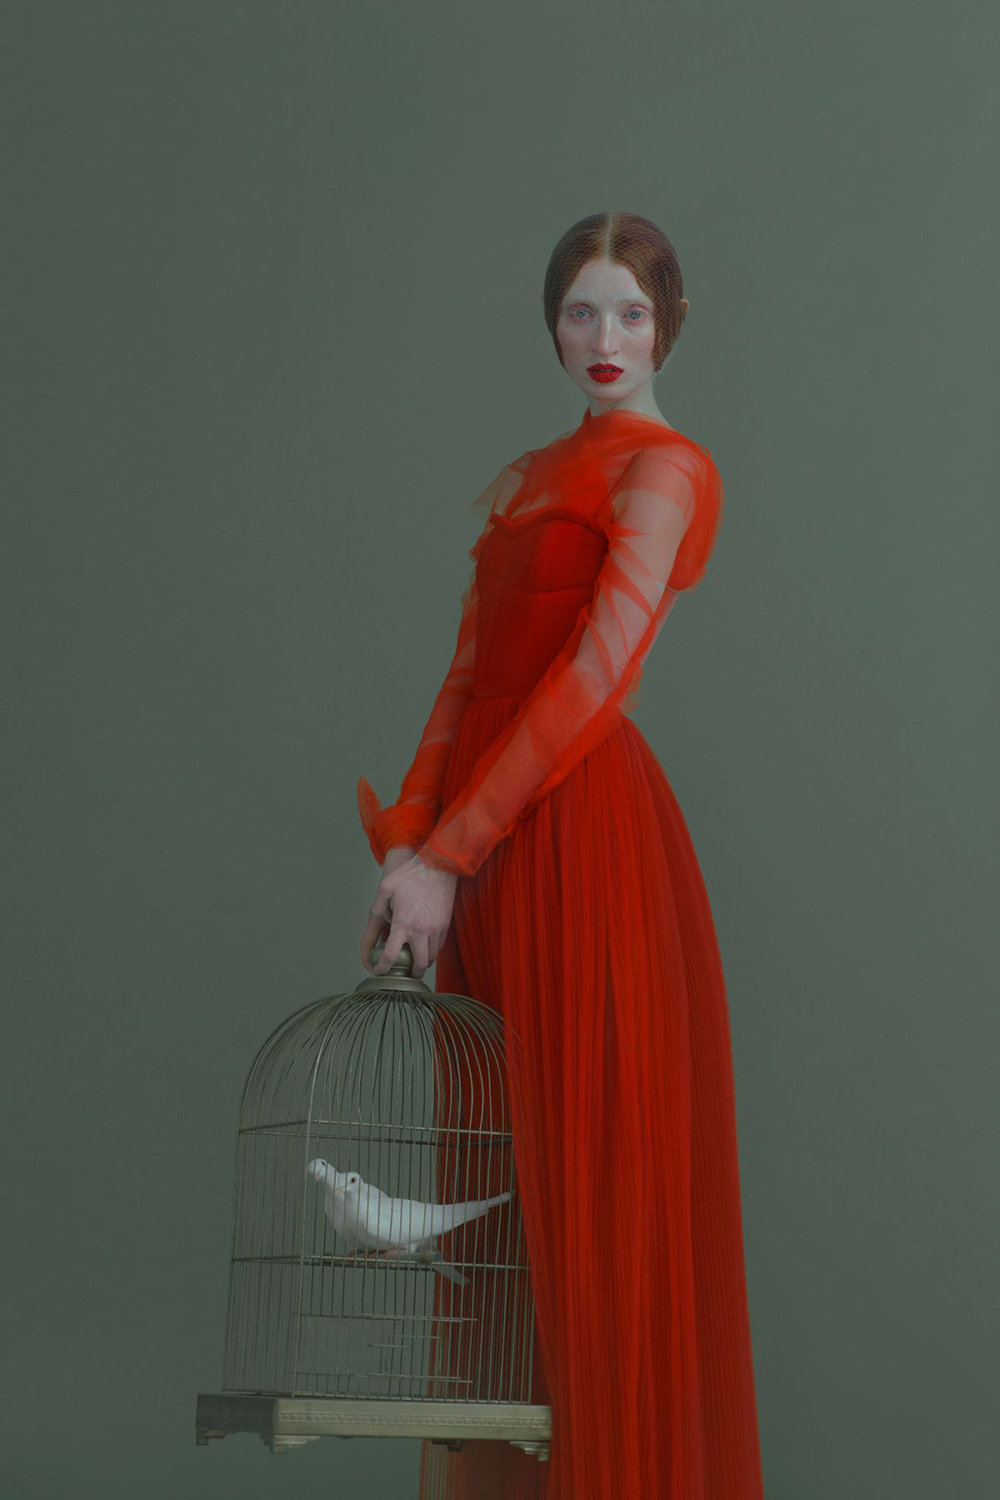 The Marvelously Poetic Editorial And Conceptual Photography Of Evelyn Bencicova 14